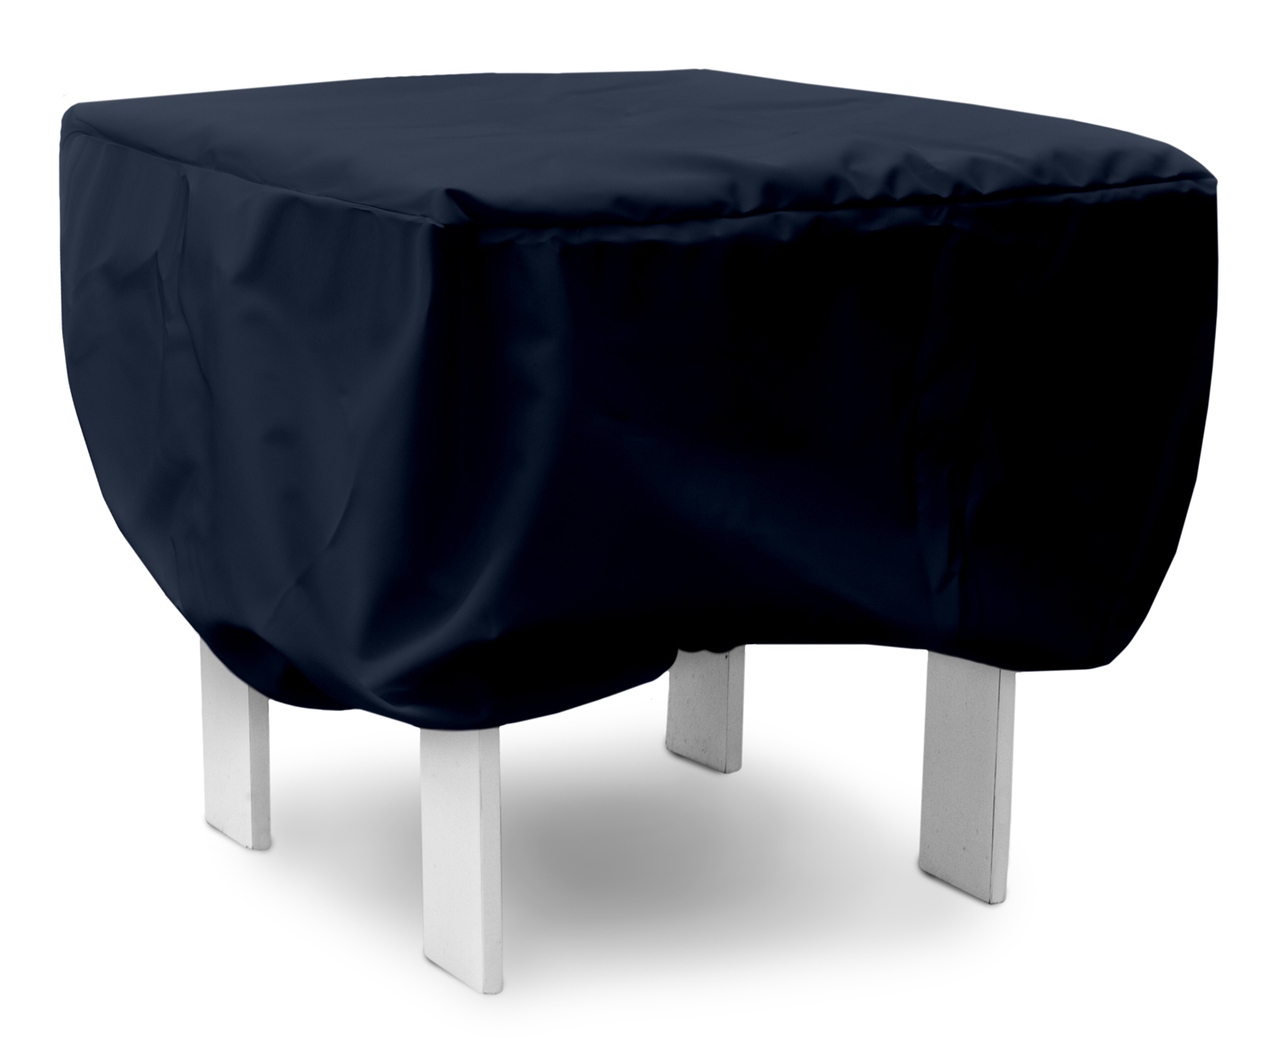 Small Square Table Cover - 30L x 30W x 15H in.